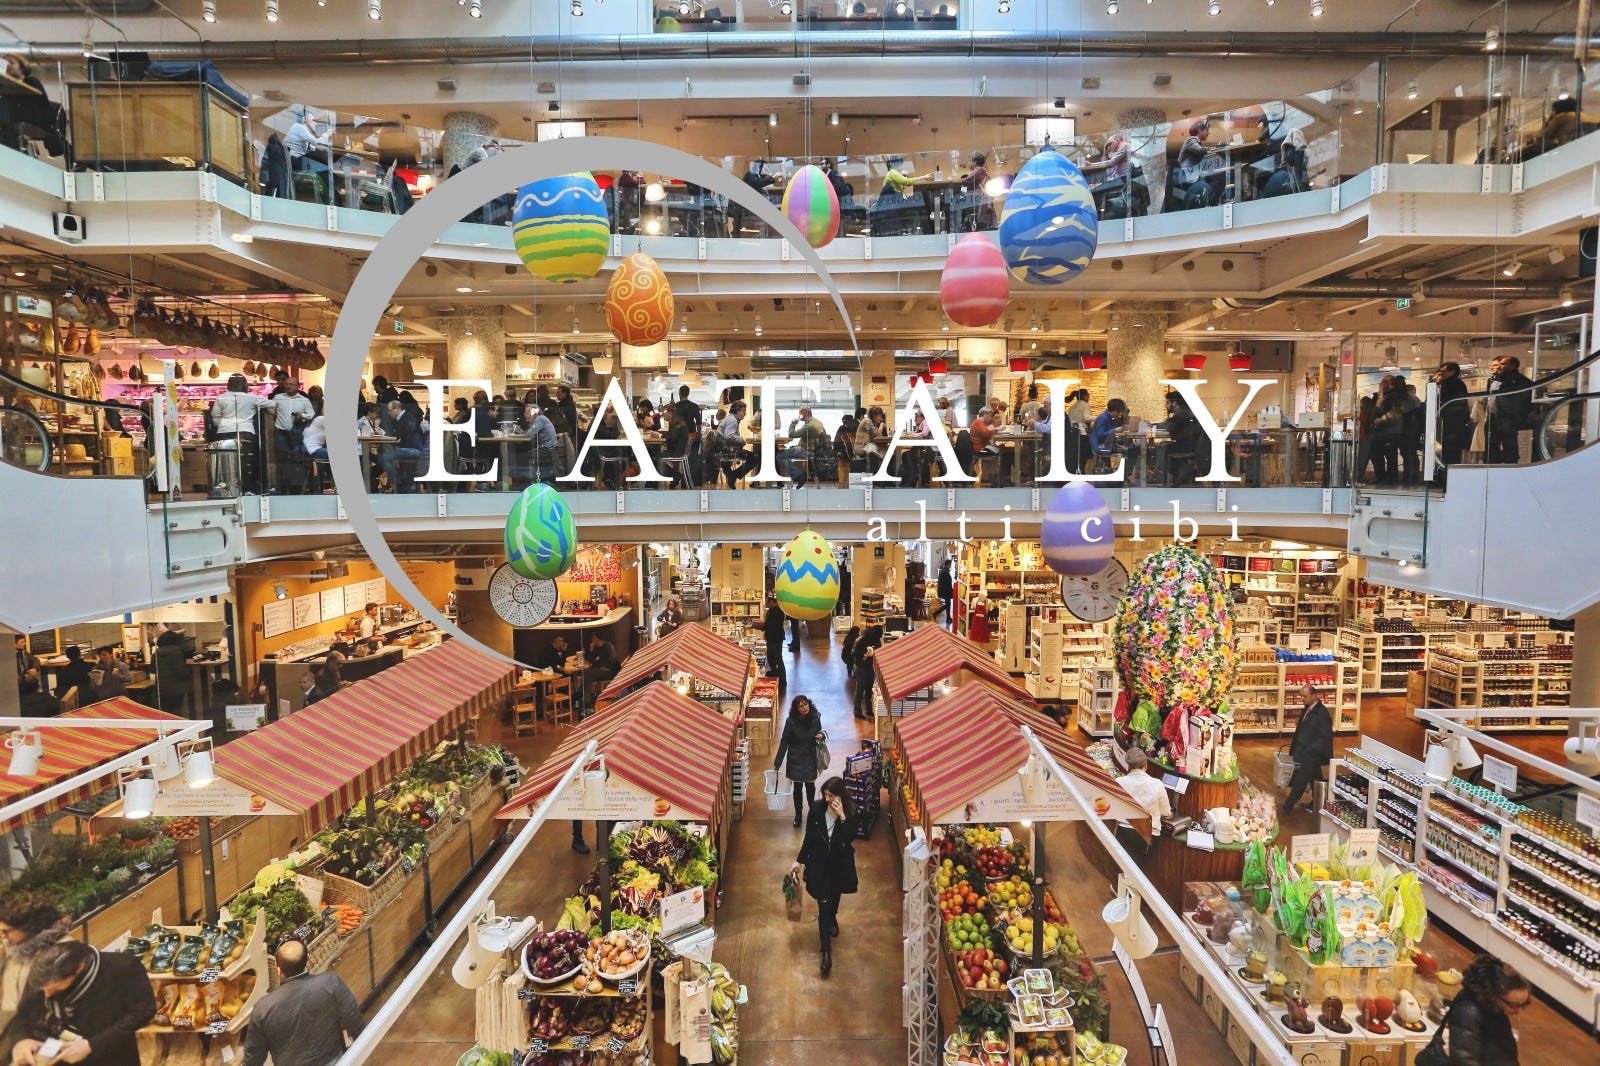 Eataly in talks to open first Israeli outlet in Azrieli Sarona, by JEF, Jewish  Economic Forum